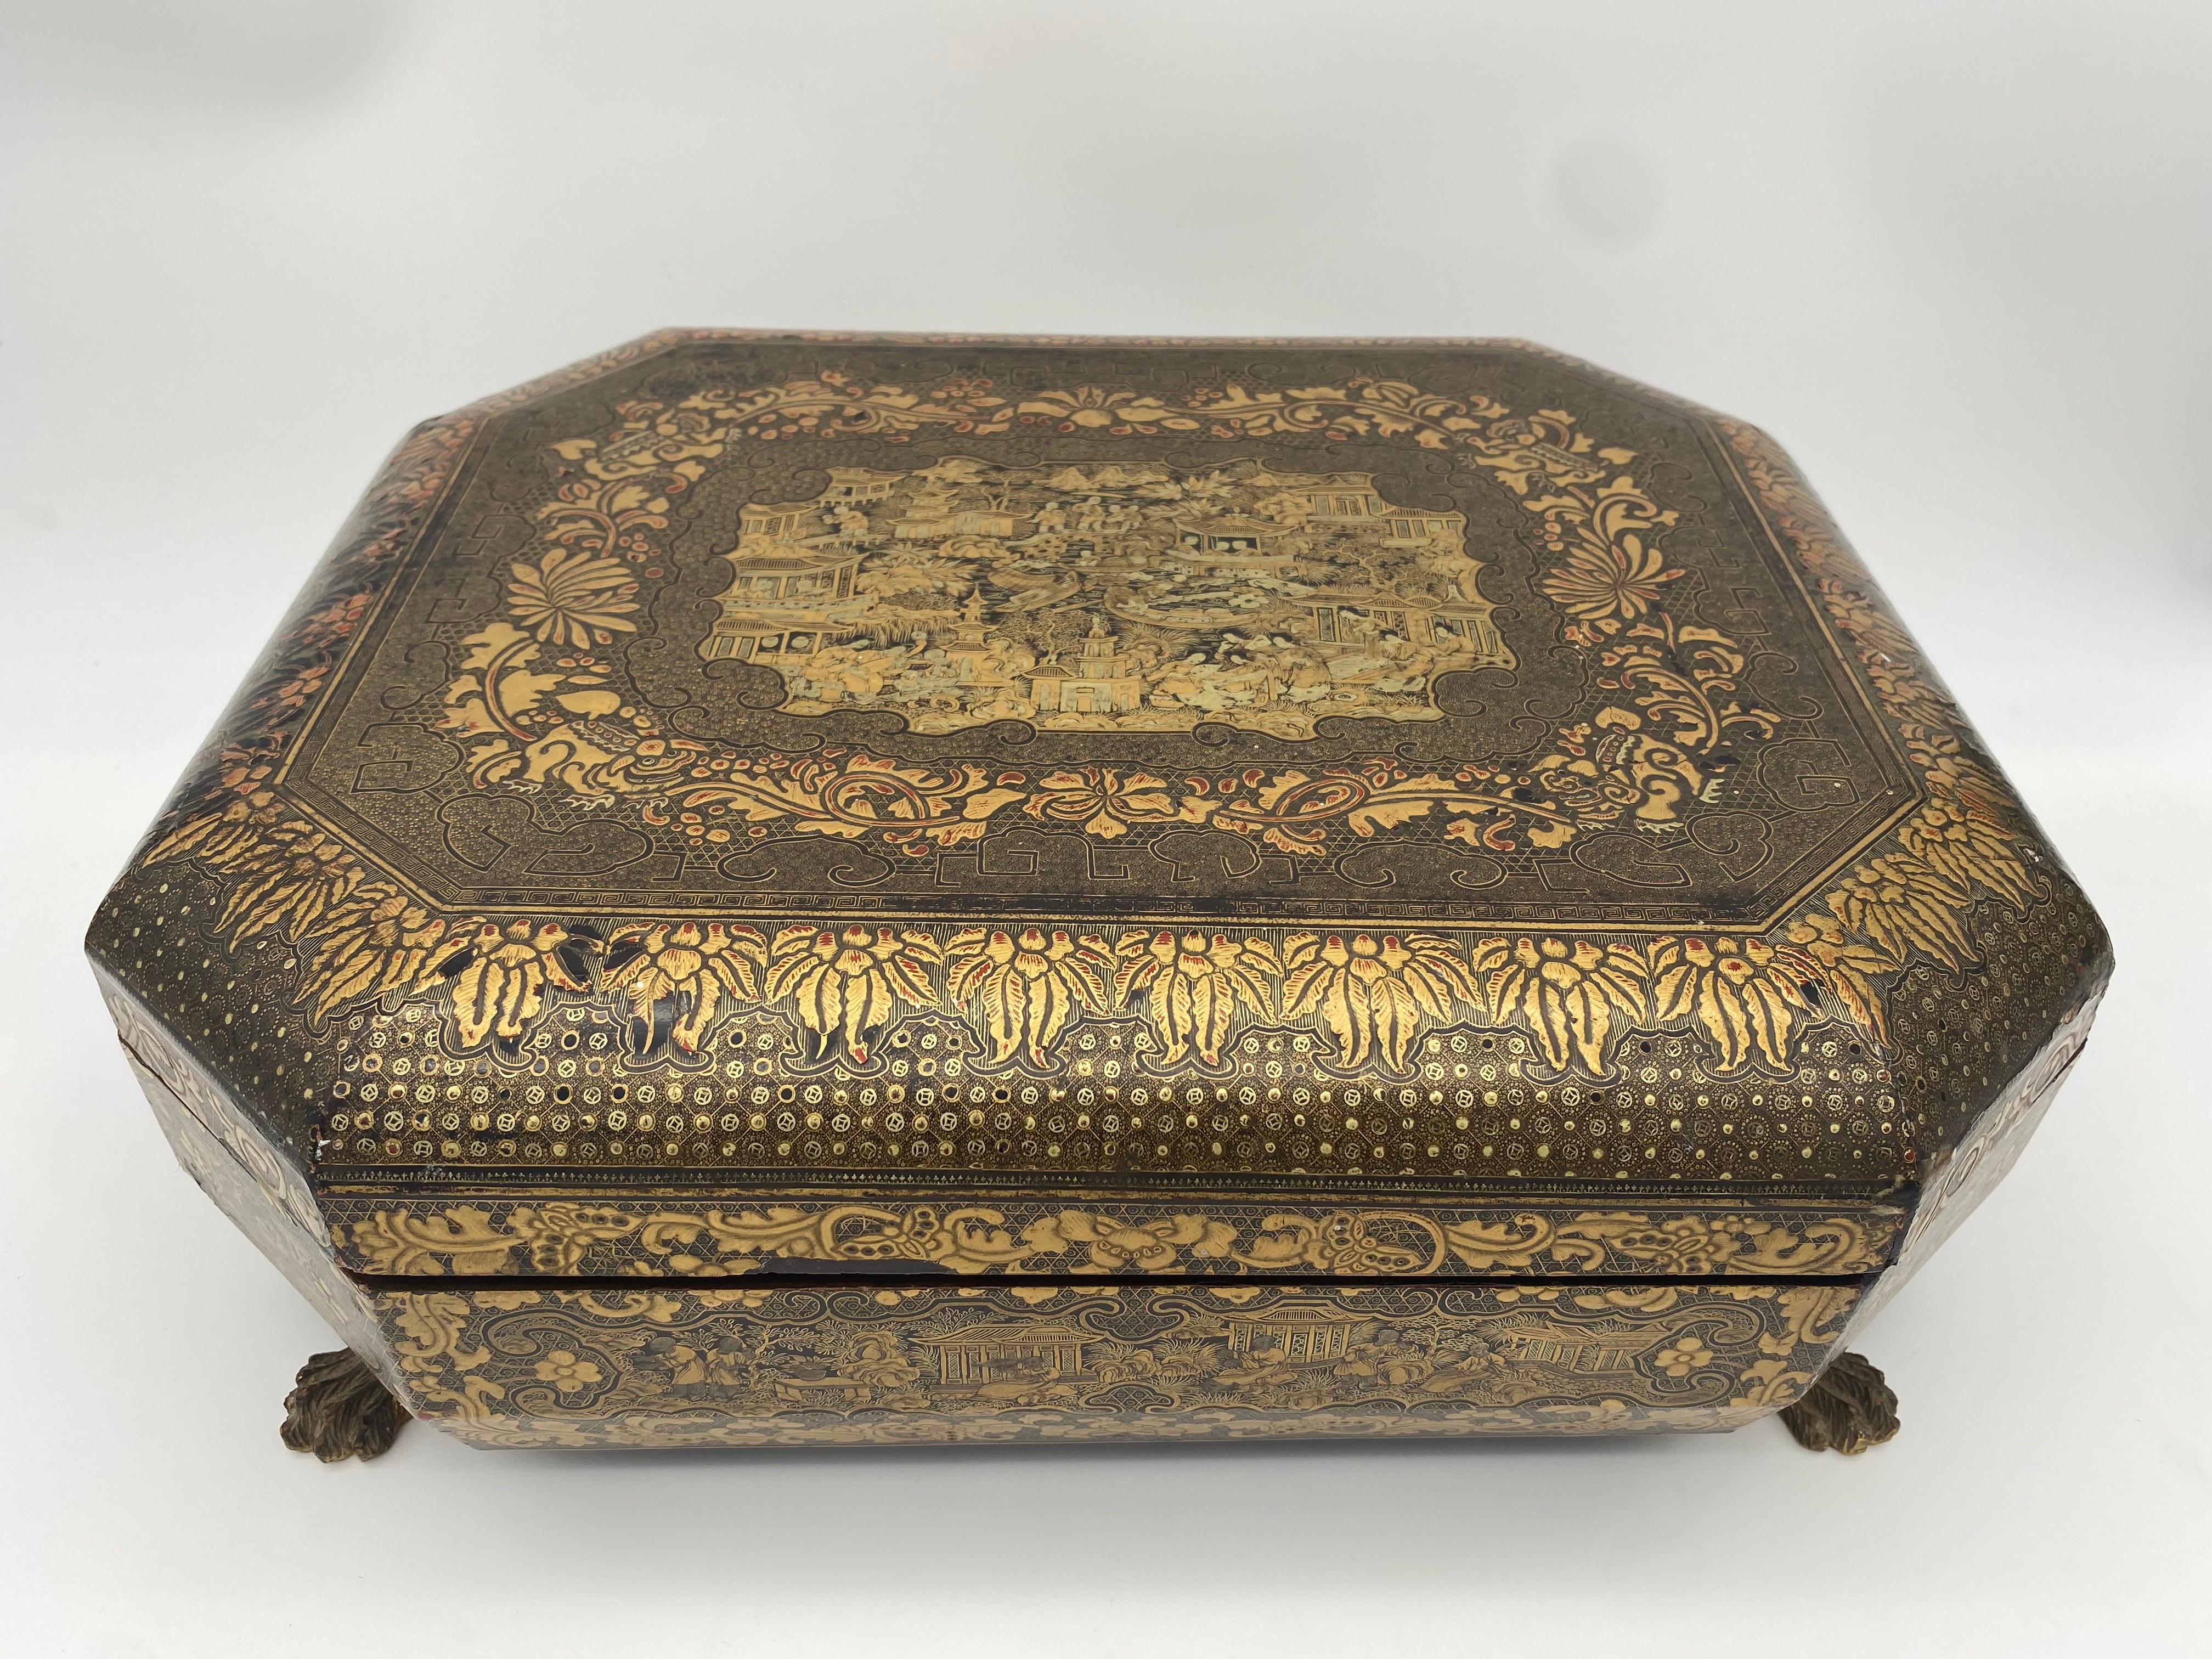 Antique 19th Century Export Chinese Lacquer Gaming Box In Good Condition For Sale In Brea, CA